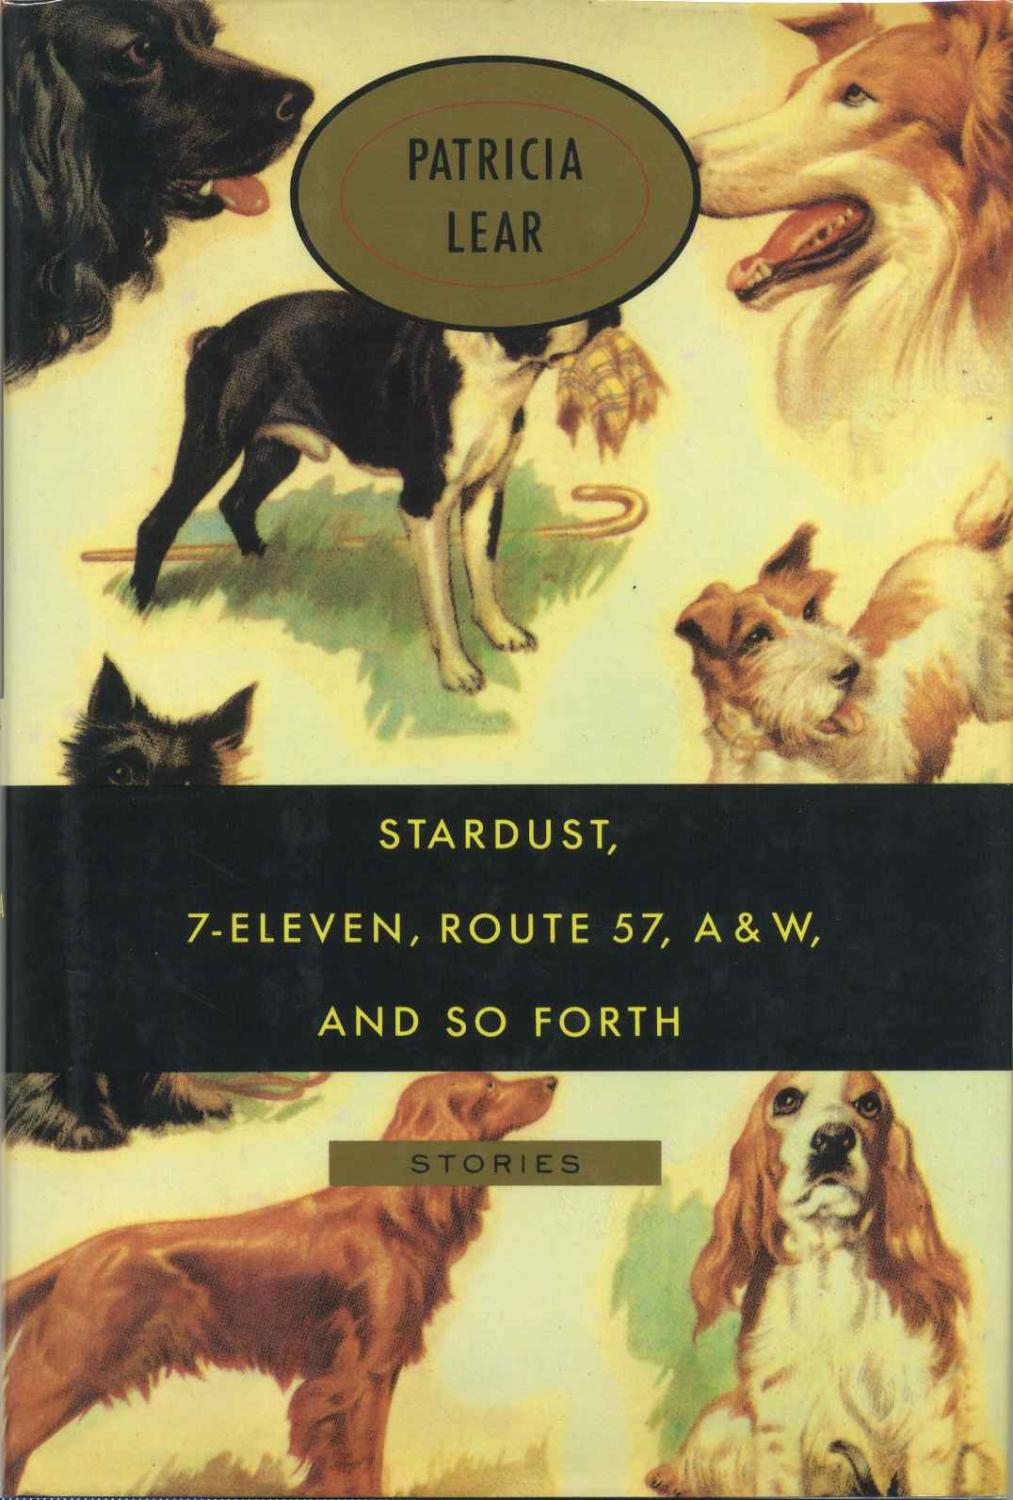 STARDUST, 7-ELEVEN, ROUTE 57, A&W, AND SO FORTH. Signed by Patricia Lear. - Lear, Patricia